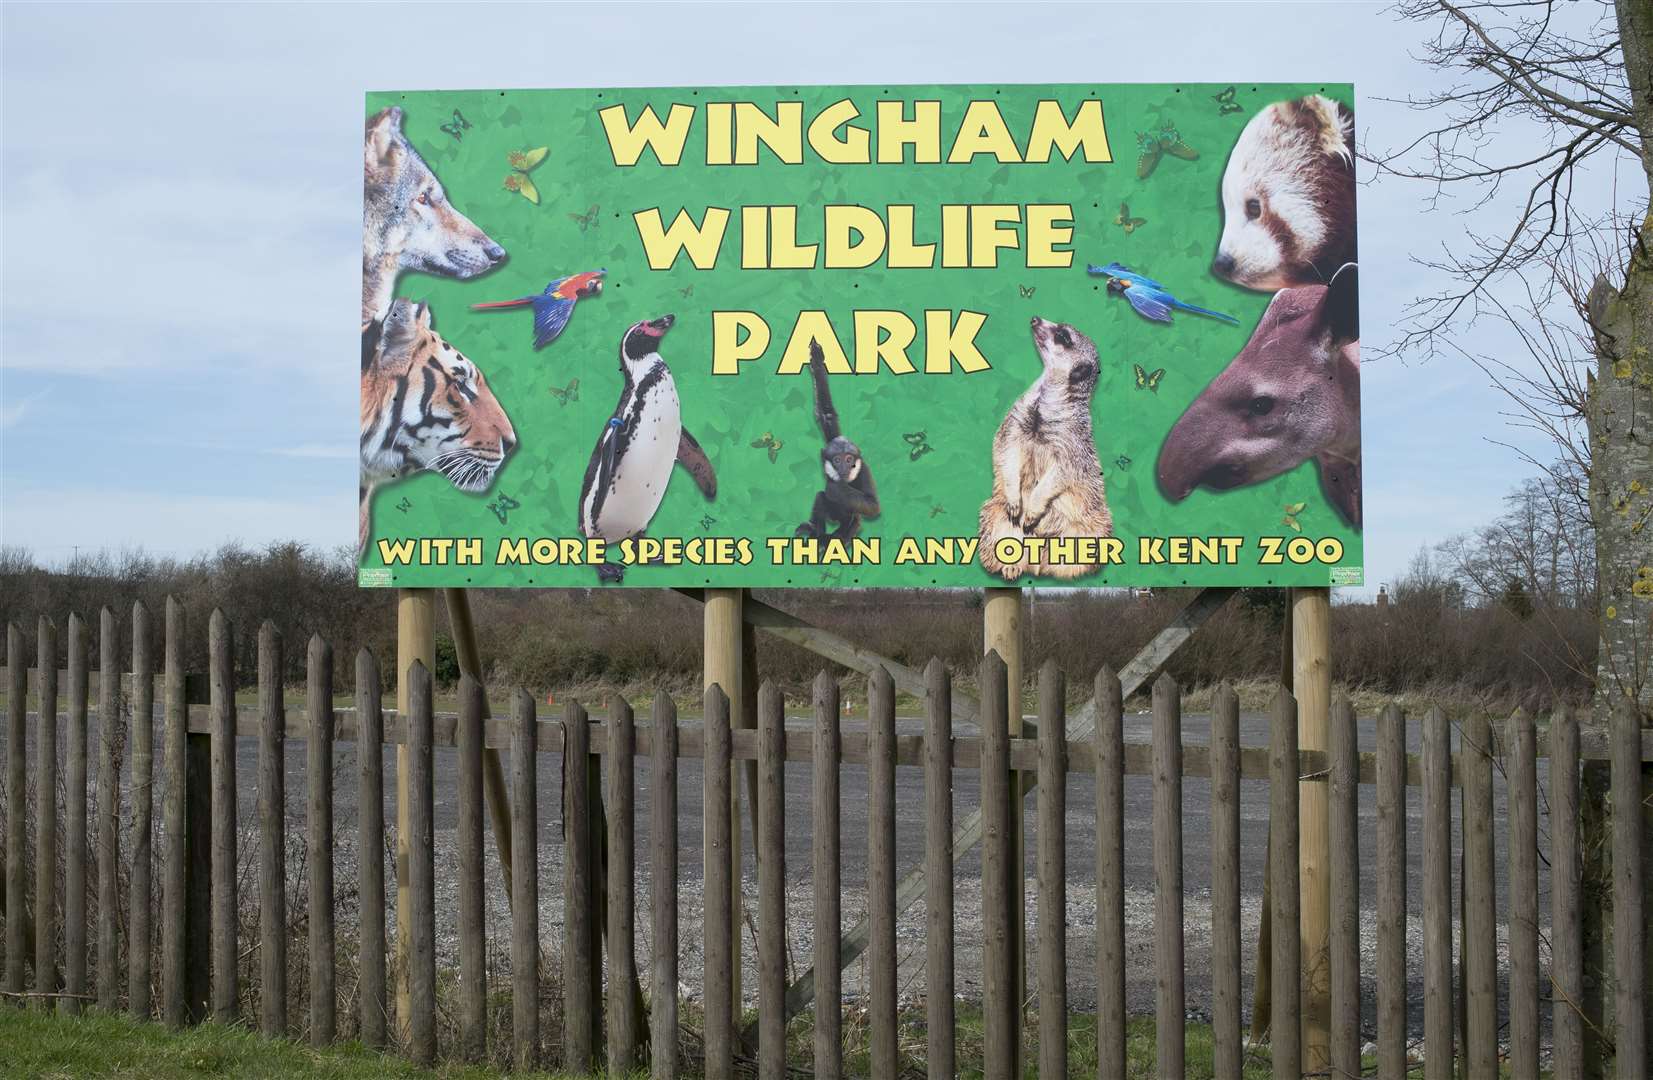 Wingham is the only wildlife park in Kent that has orangutans